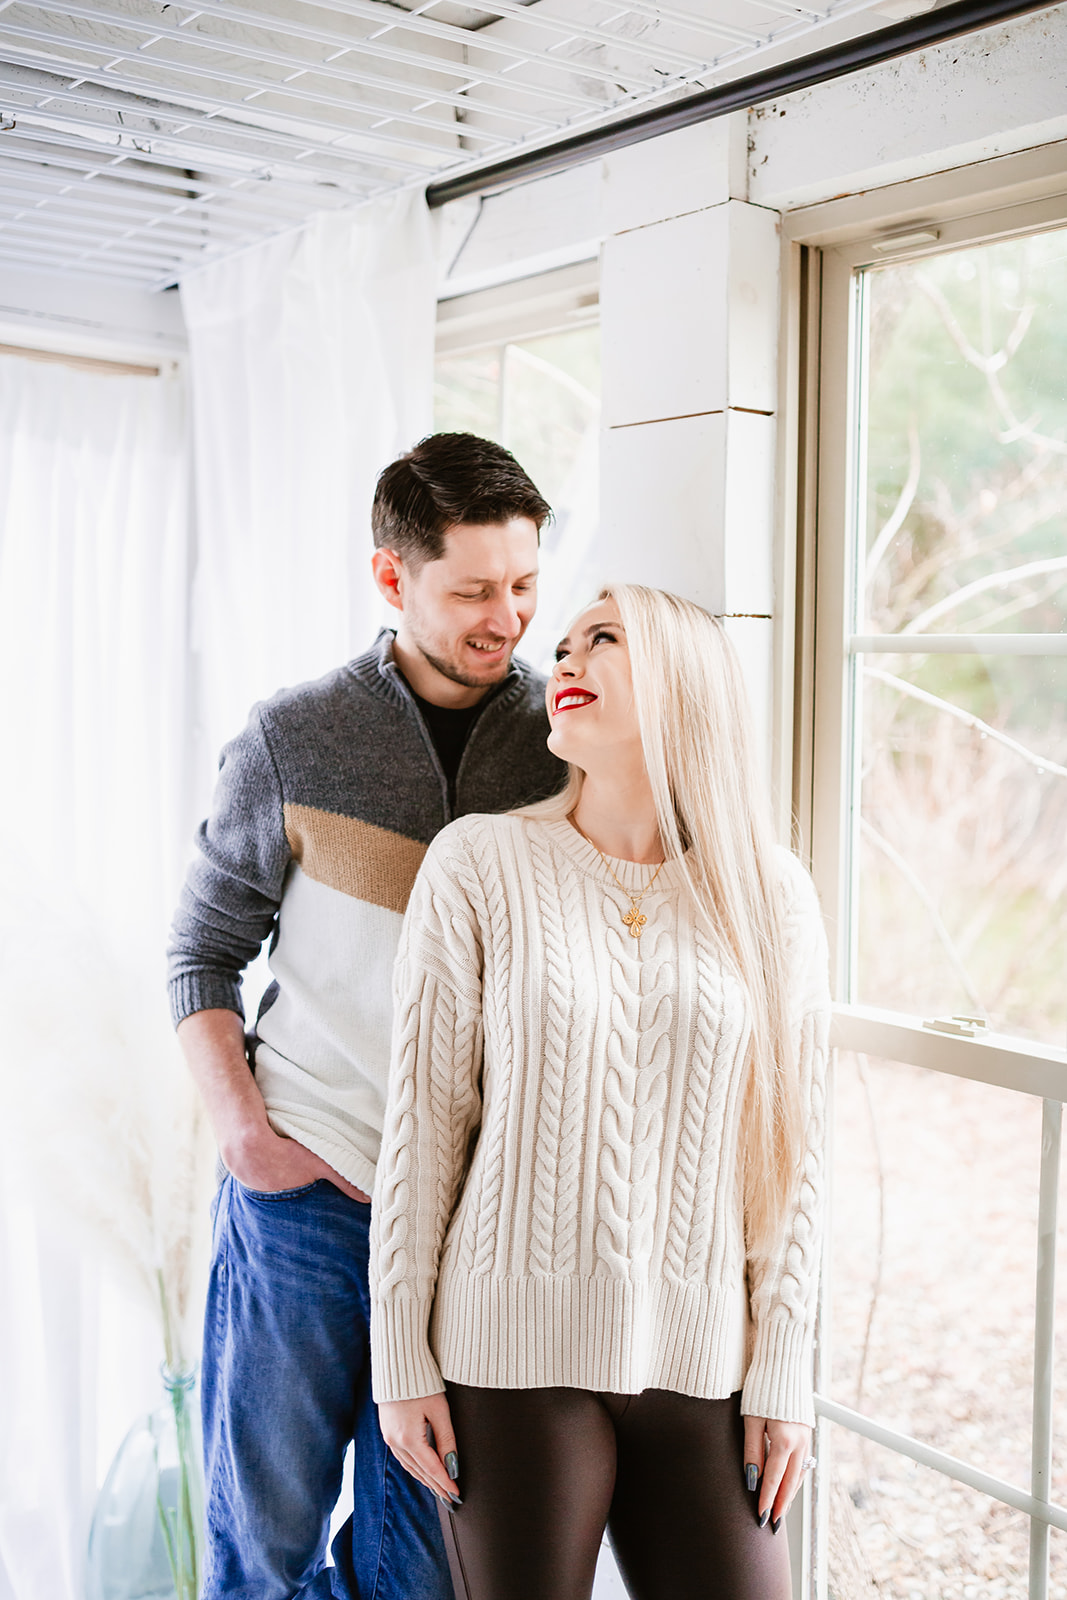 Intimate couples photo shoot in modern farmhouse loft in Westerville, Ohio